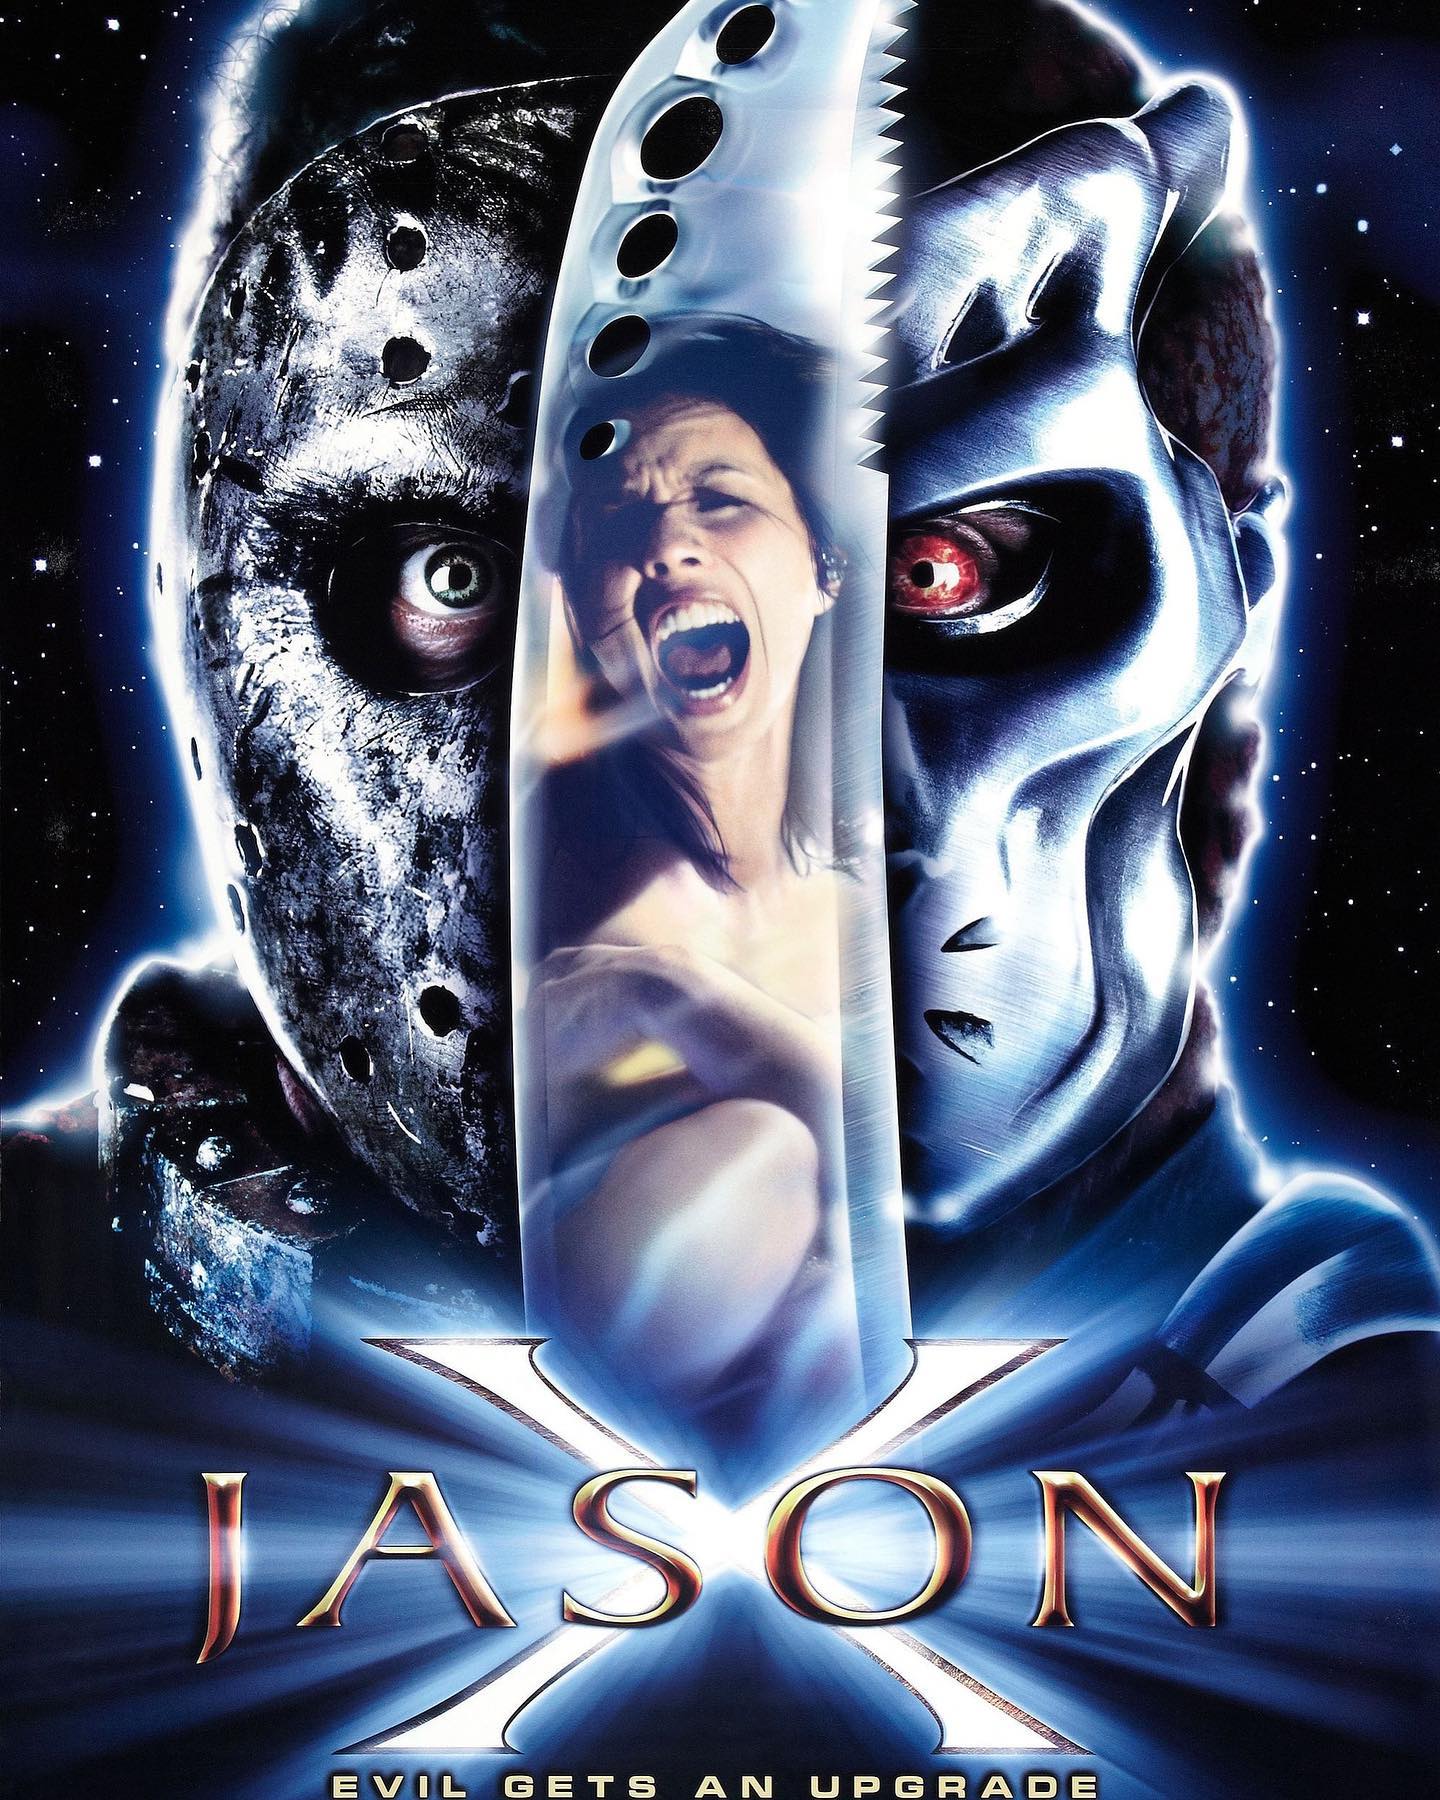 Celebrating 20 years of ‘Jason X’! In the tenth captivating installment in the Friday the 13th franchise, Jason is cryogenically frozen and leaves the planet! He awakens in 2455 after being found by a group of students, whom he subsequently stalks and kills one by one. #JasonX #fridaythe13th #kanehodder #jasonvoorhees #evilgetsanupgrade #horror